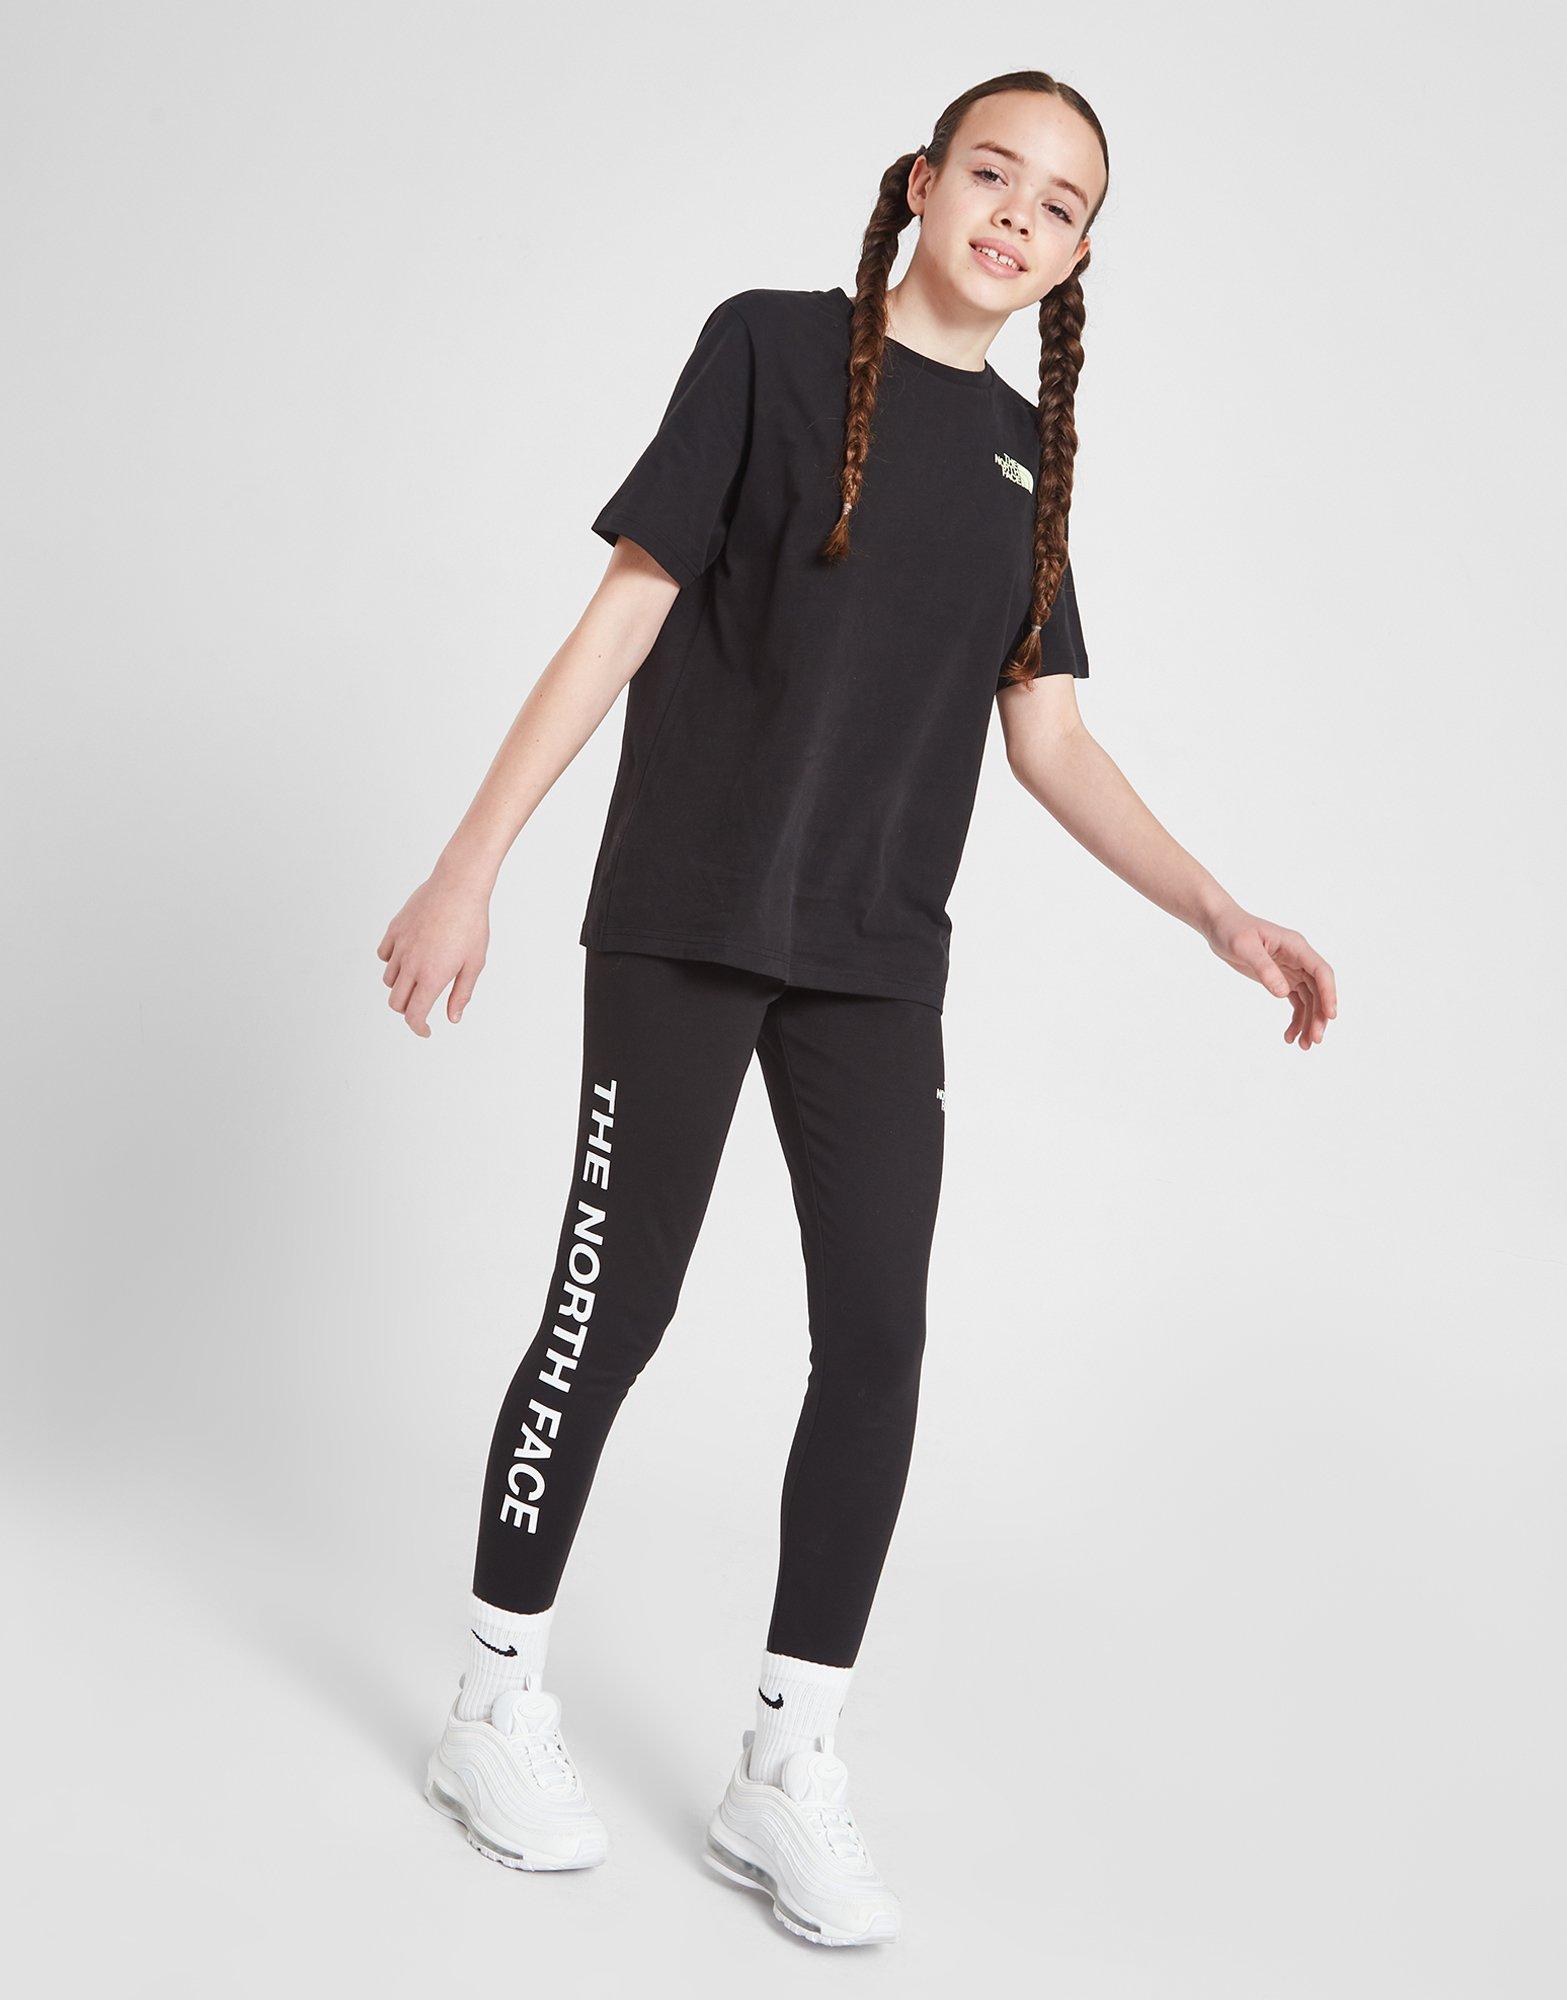 The North Face Girls Graphic Leggings Black - Free delivery